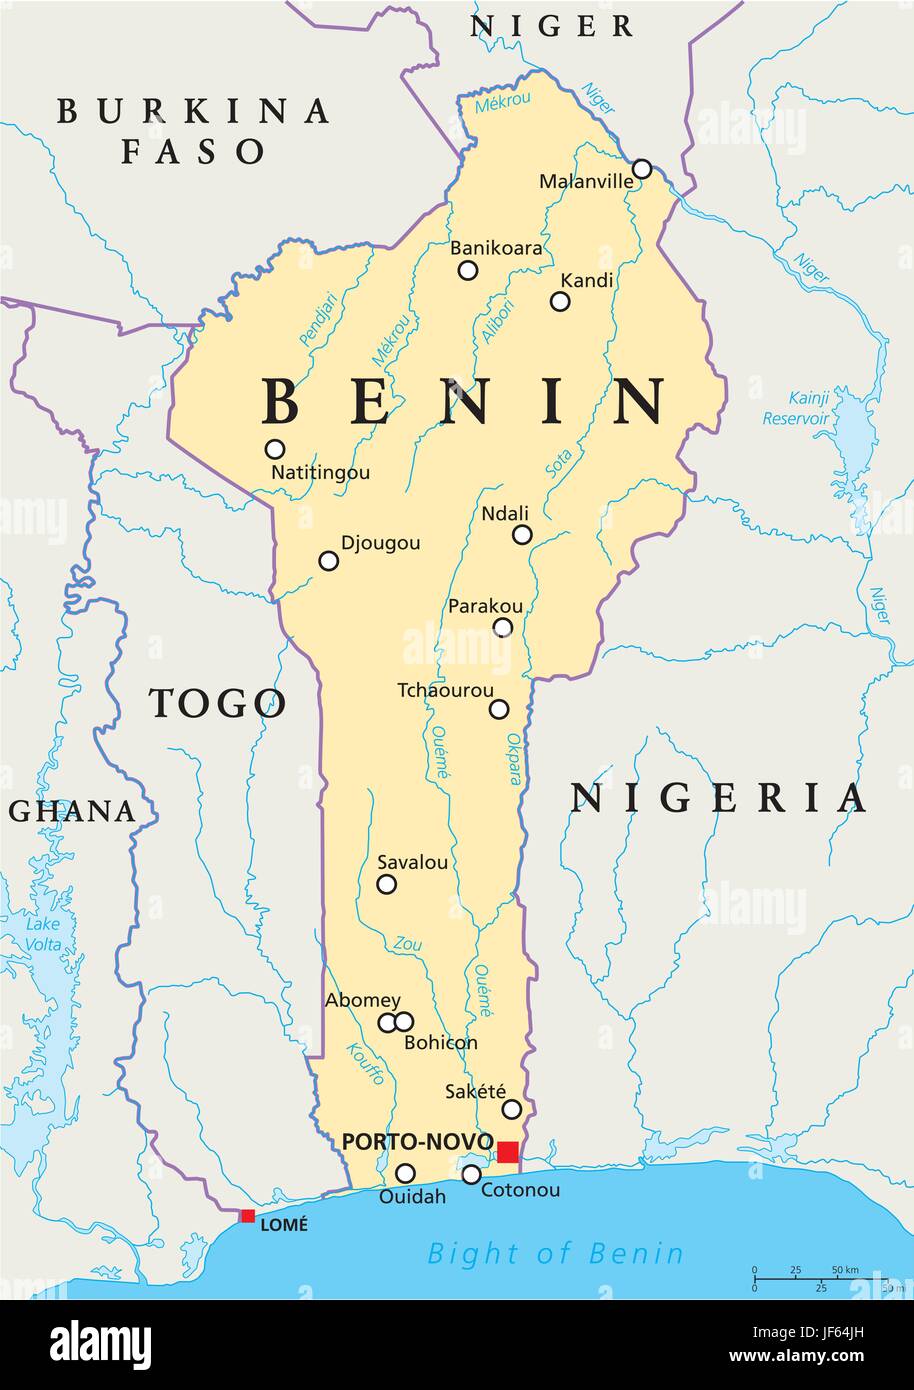 Benin Map Atlas Map Of The World Africa Illustration Country